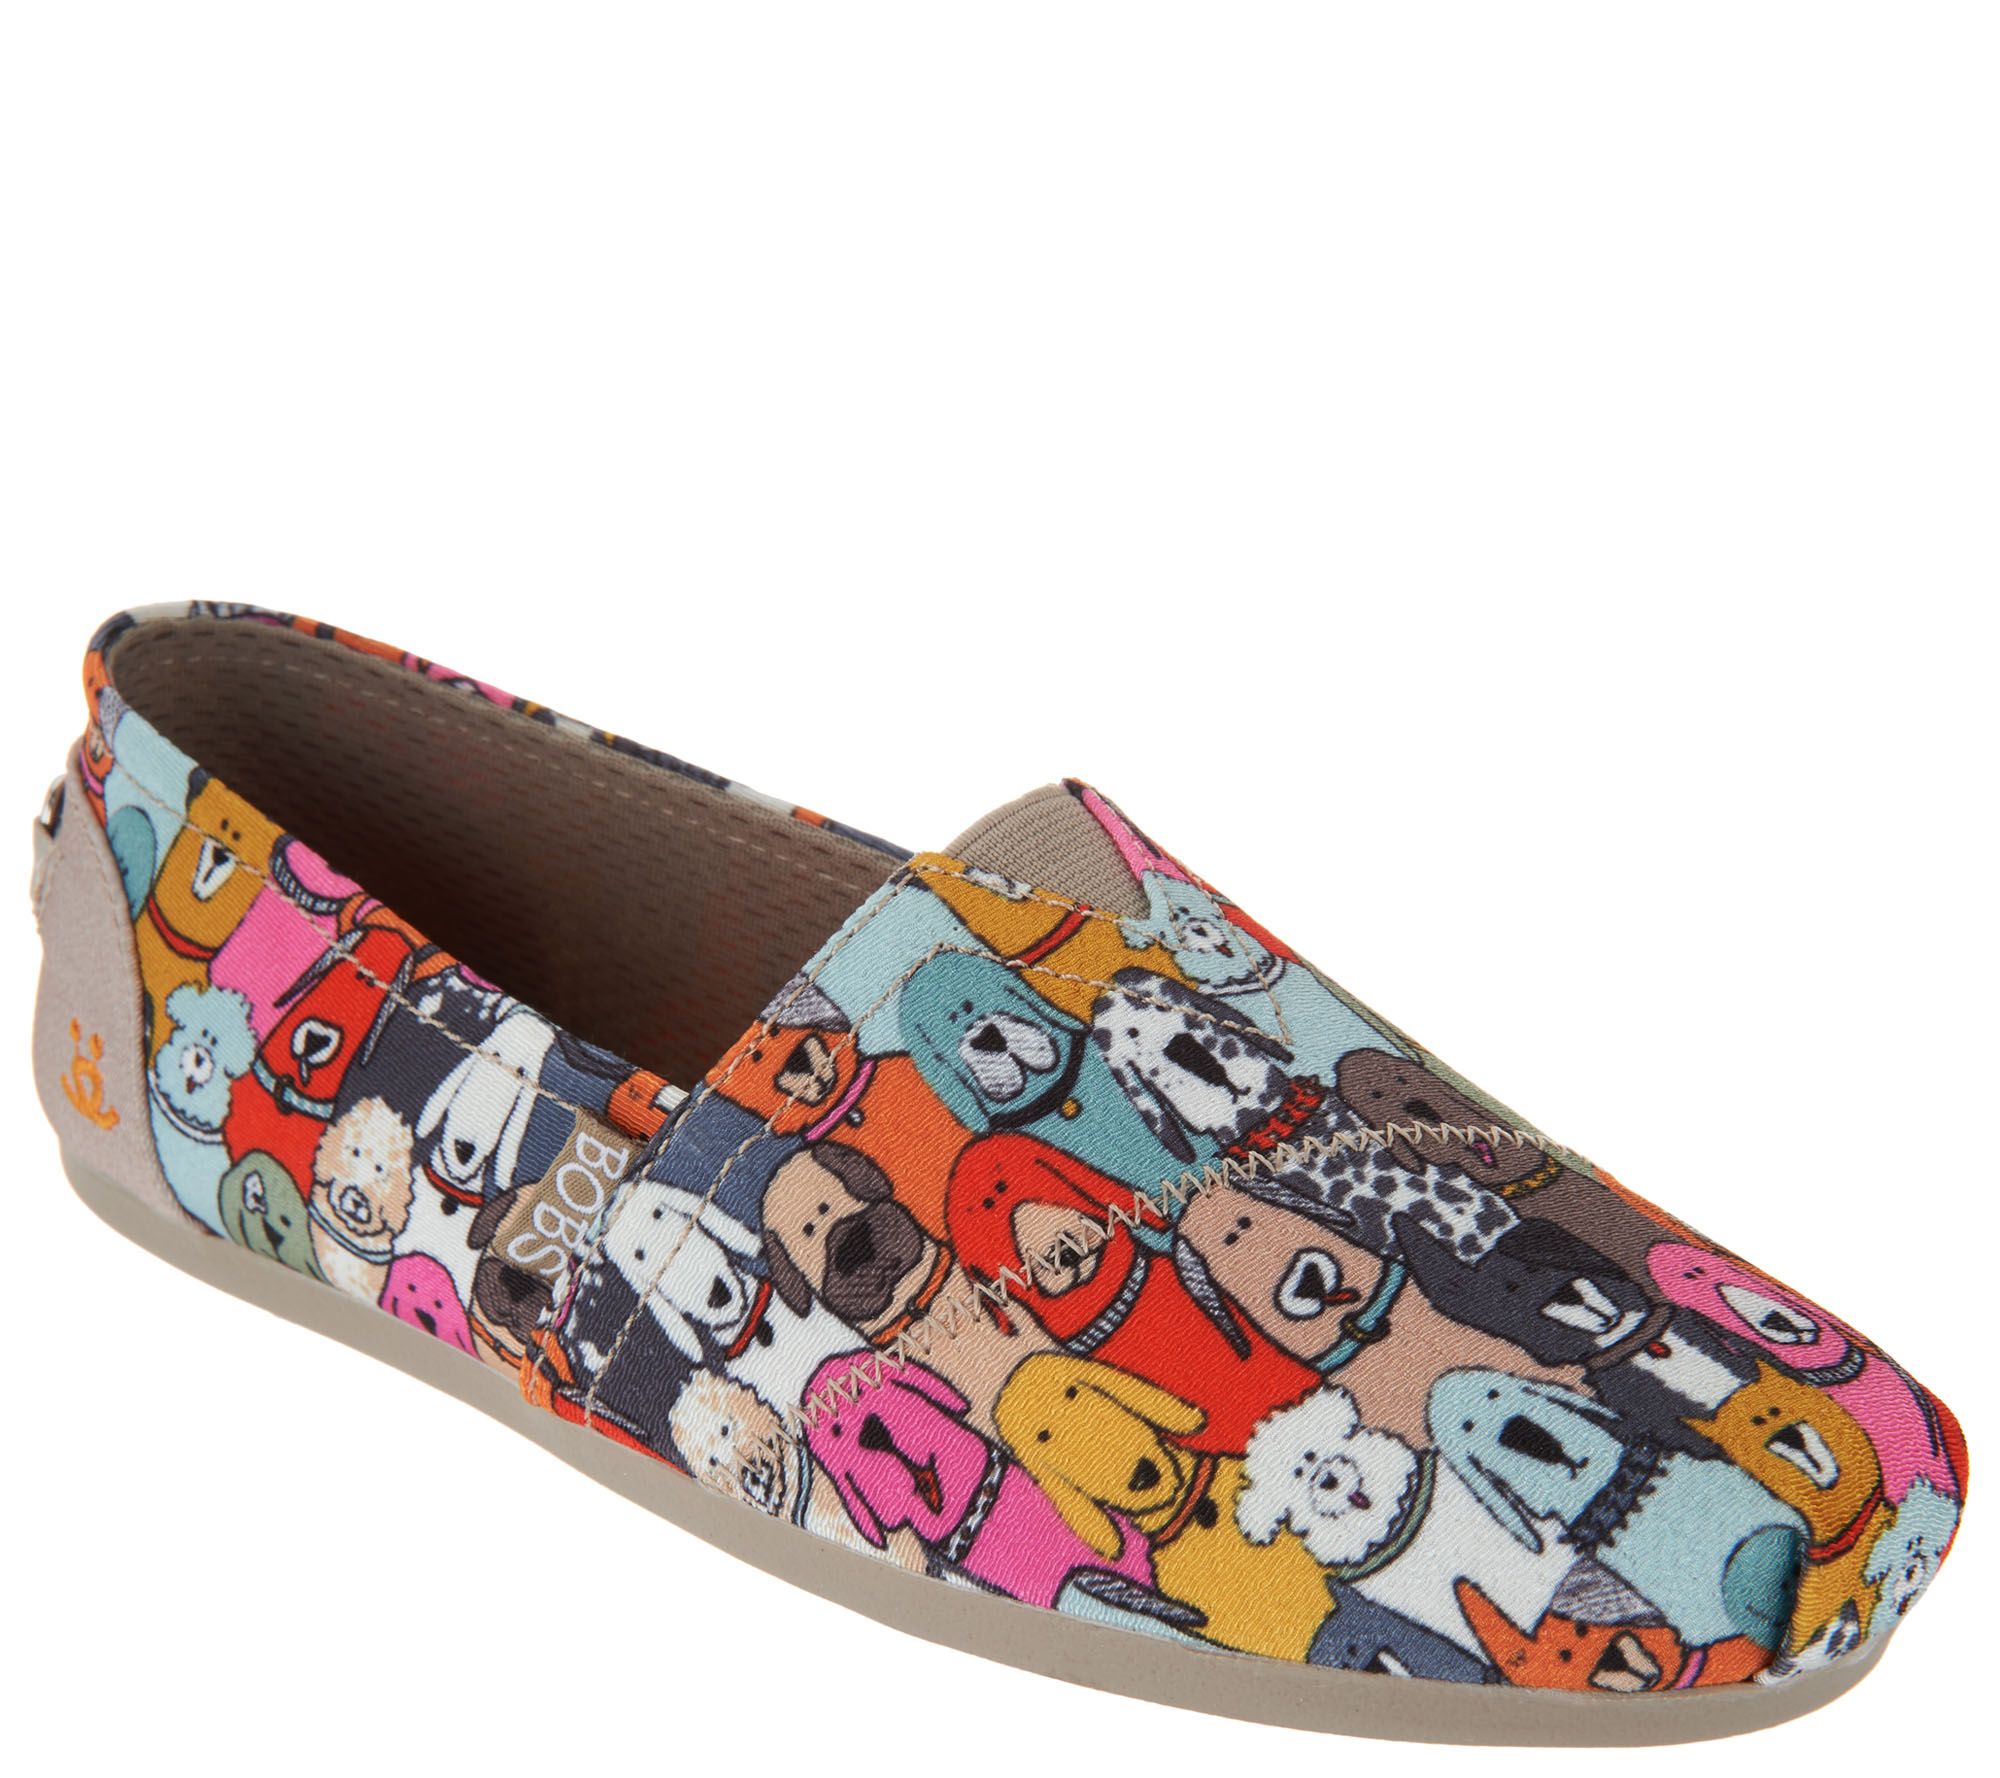 bob's for dogs by skechers